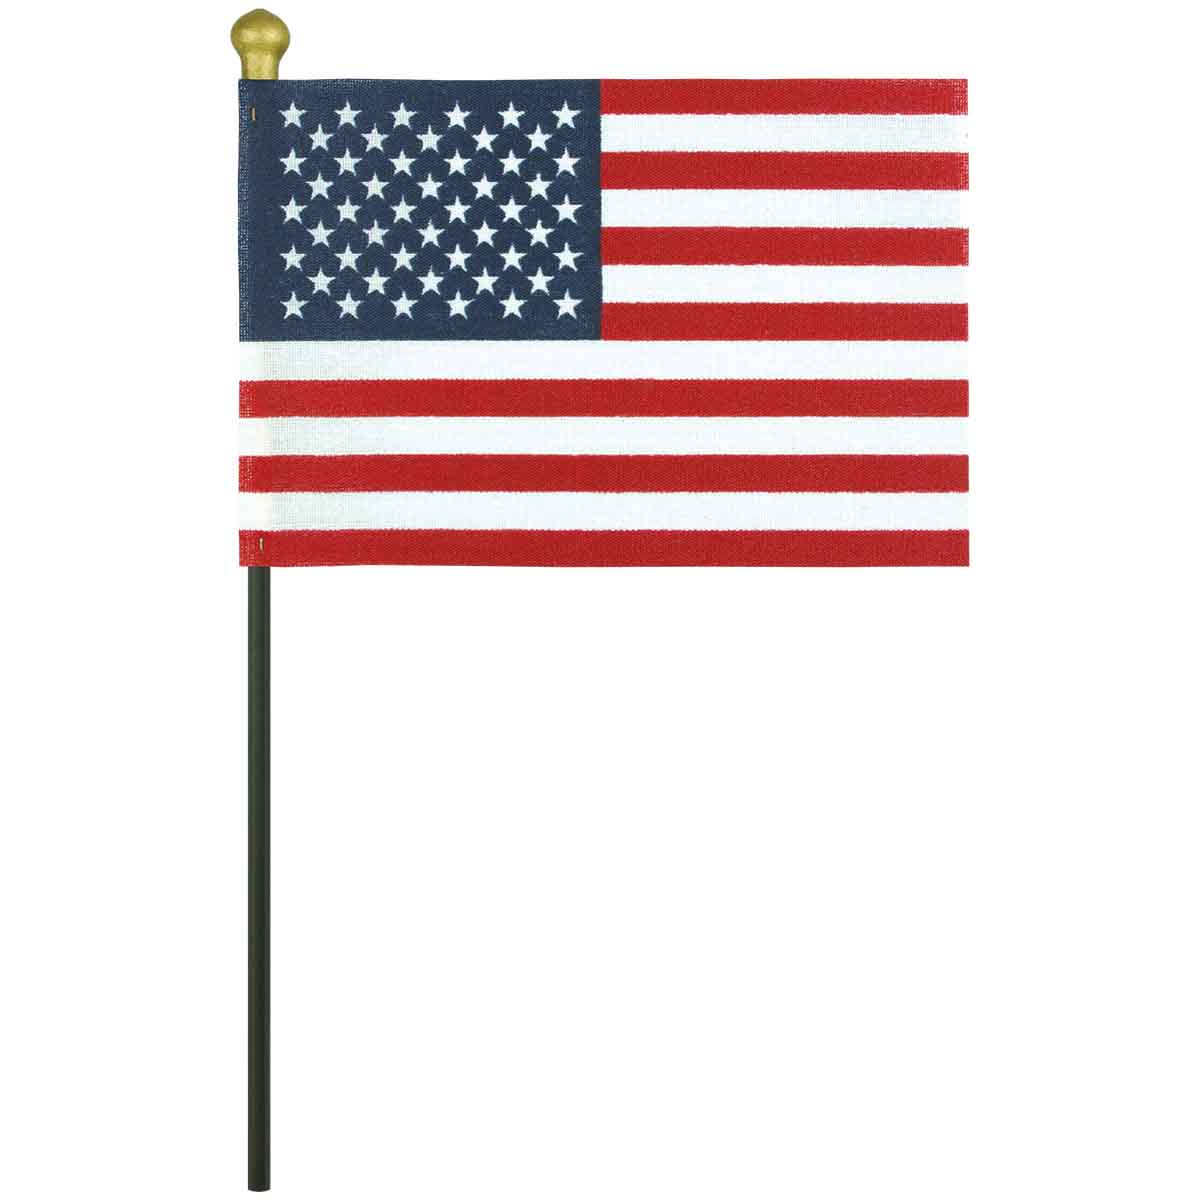 U.S. Flags No-Fray Poly-Cotton with Vinyl Ball Tip